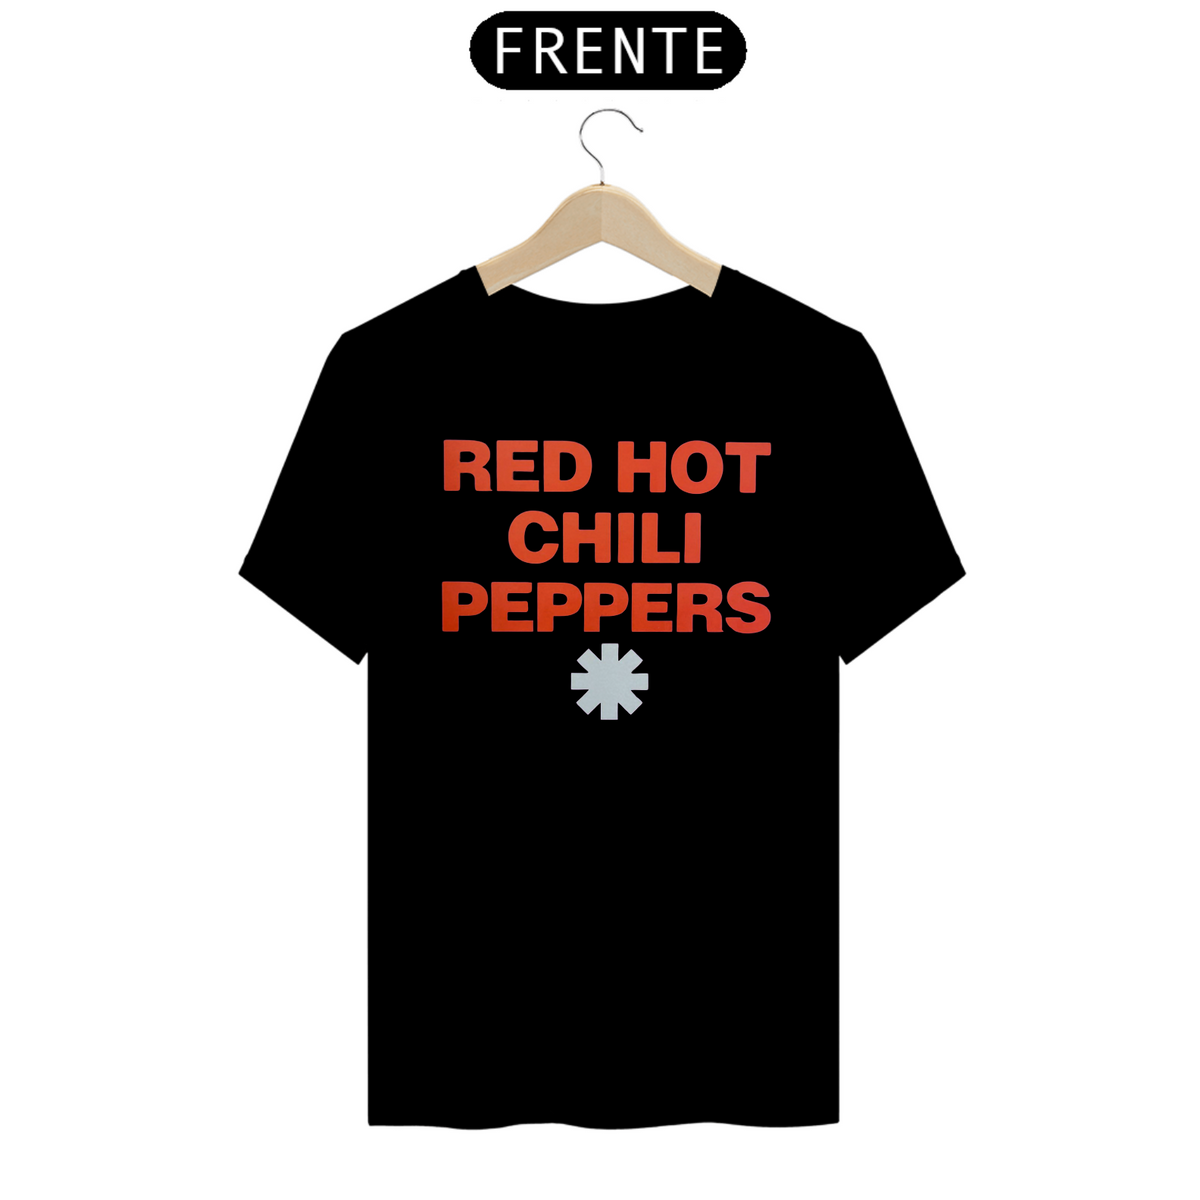 Nome do produto: Red Hot Chili Peppers